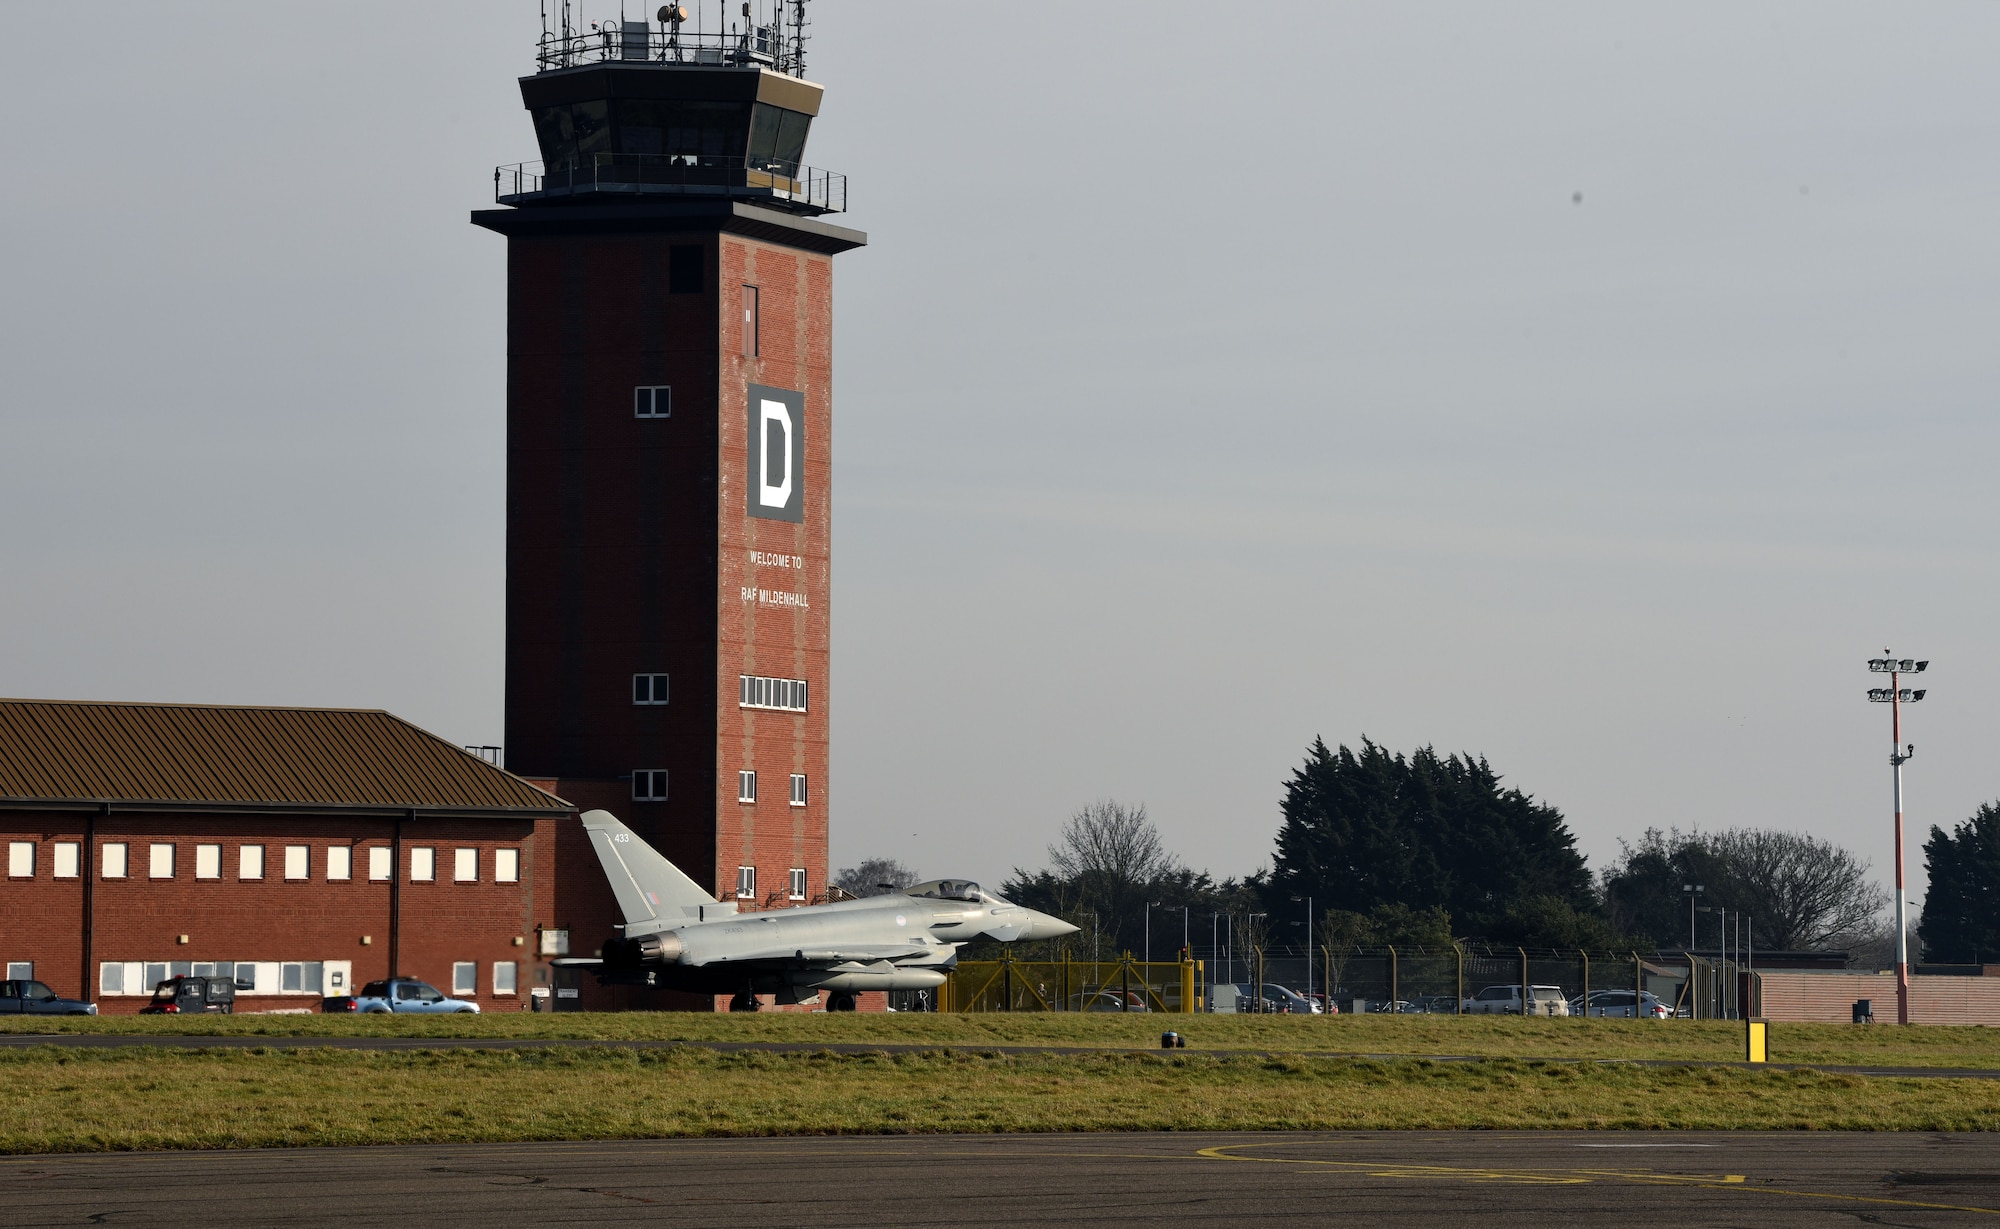 A Royal Air Force Eurofighter Typhoon FGR4 taxis past the air traffic control tower as it prepares to take off at Royal Air Force Mildenhall, England, Feb. 15, 2023. The aircraft, from RAF Coningsby, England, diverted here due to bad weather. The Typhoon is a highly capable and extremely agile multi-role combat aircraft, capable of being deployed for the full spectrum of air operations, including air policing, peace support and high-intensity conflict. (U.S. Air Force photo by Karen Abeyasekere)